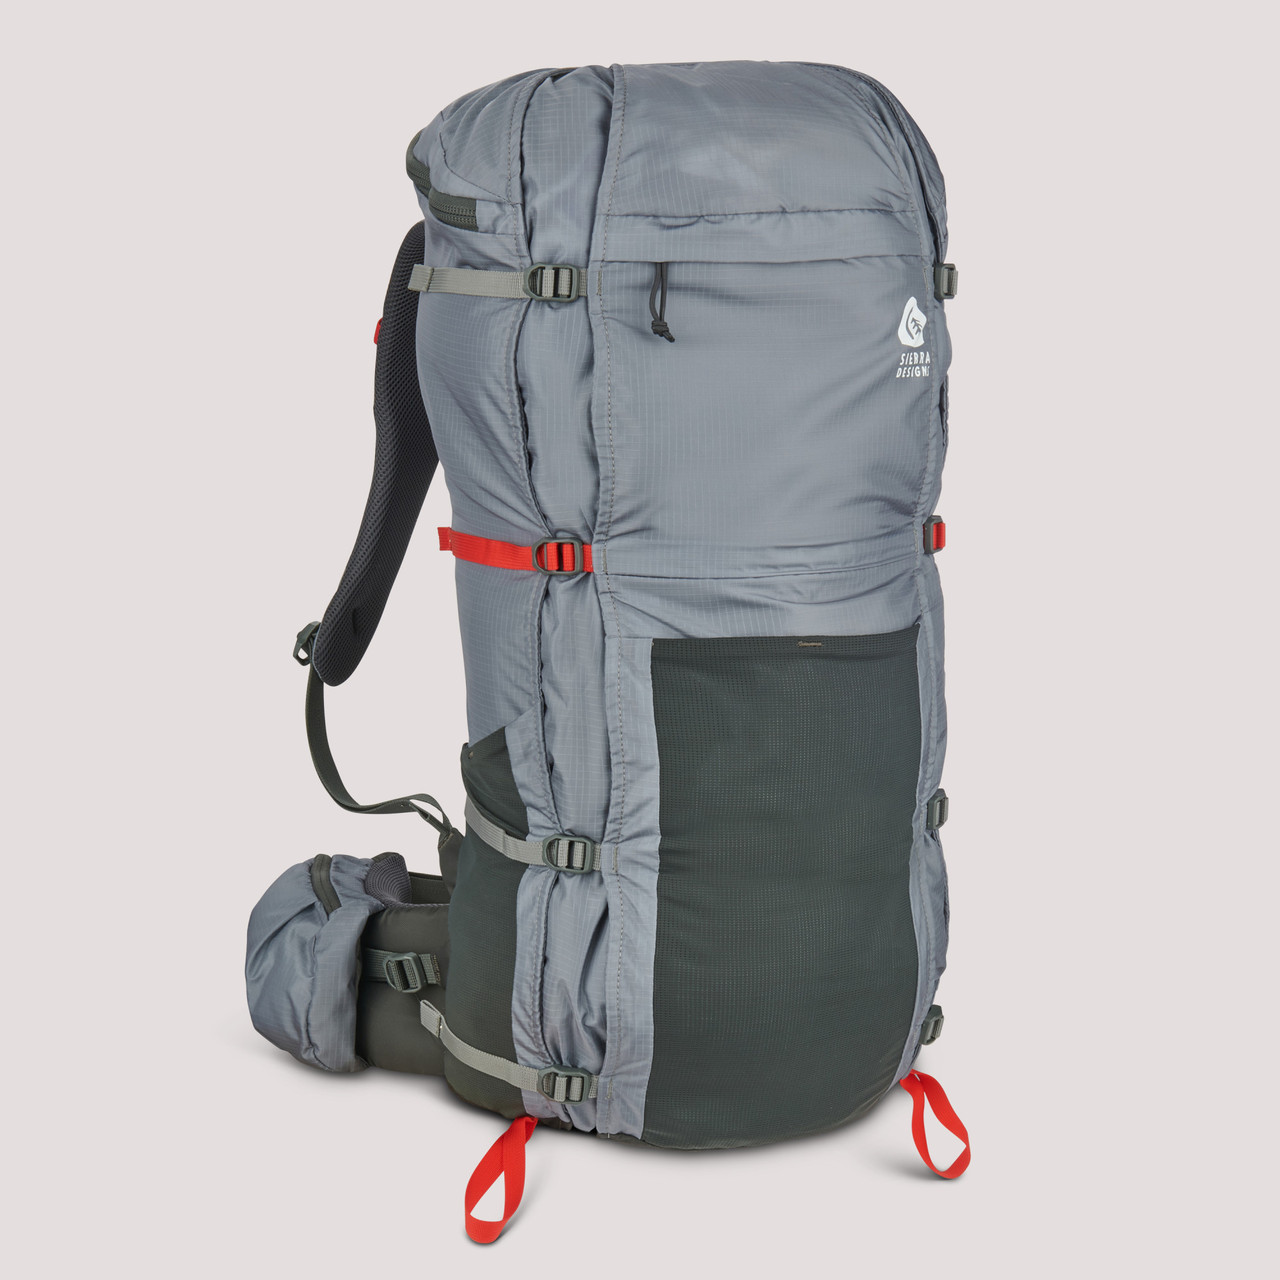 Trail Cooler Backpack | Backpack cooler | Duffelbags.com